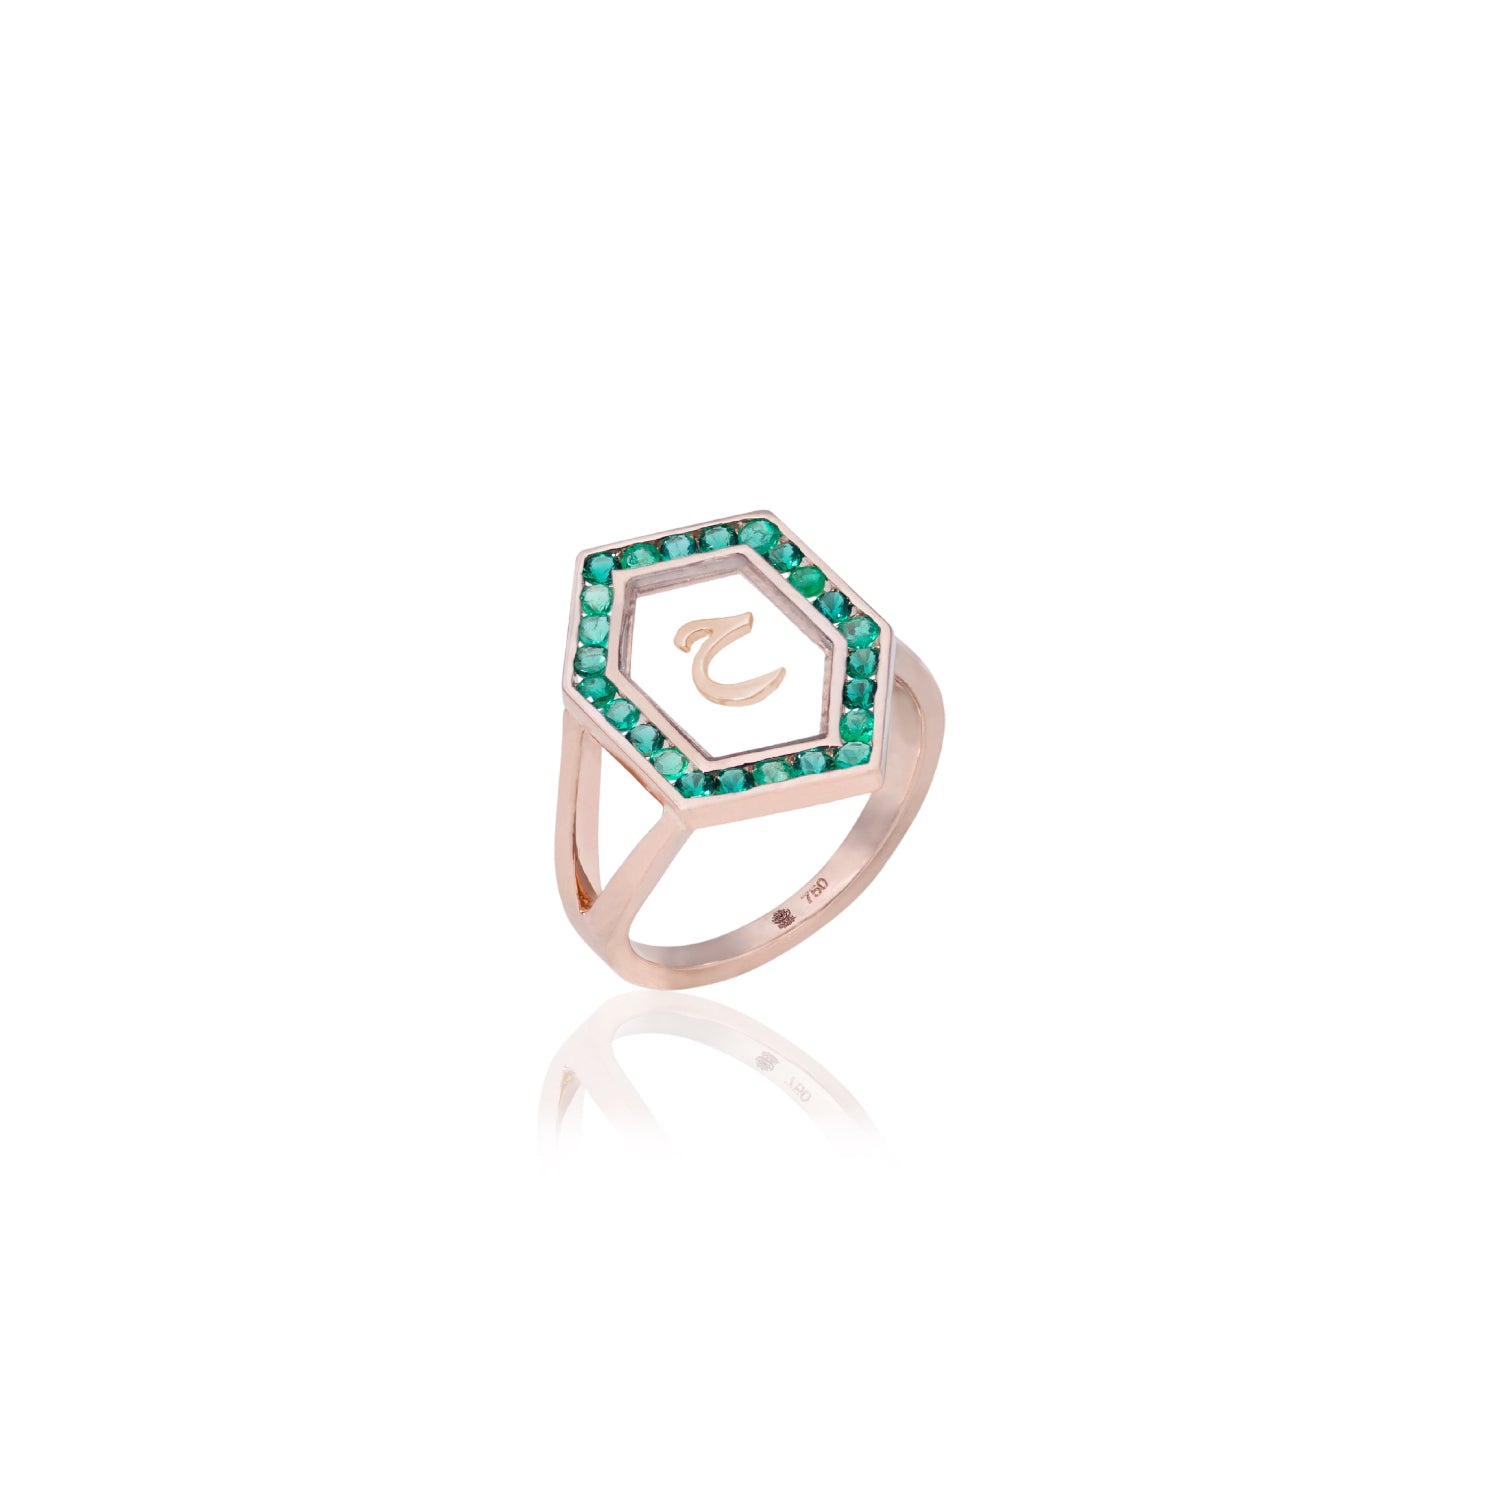 Qamoos 1.0 Letter ح Emerald Ring in Rose Gold